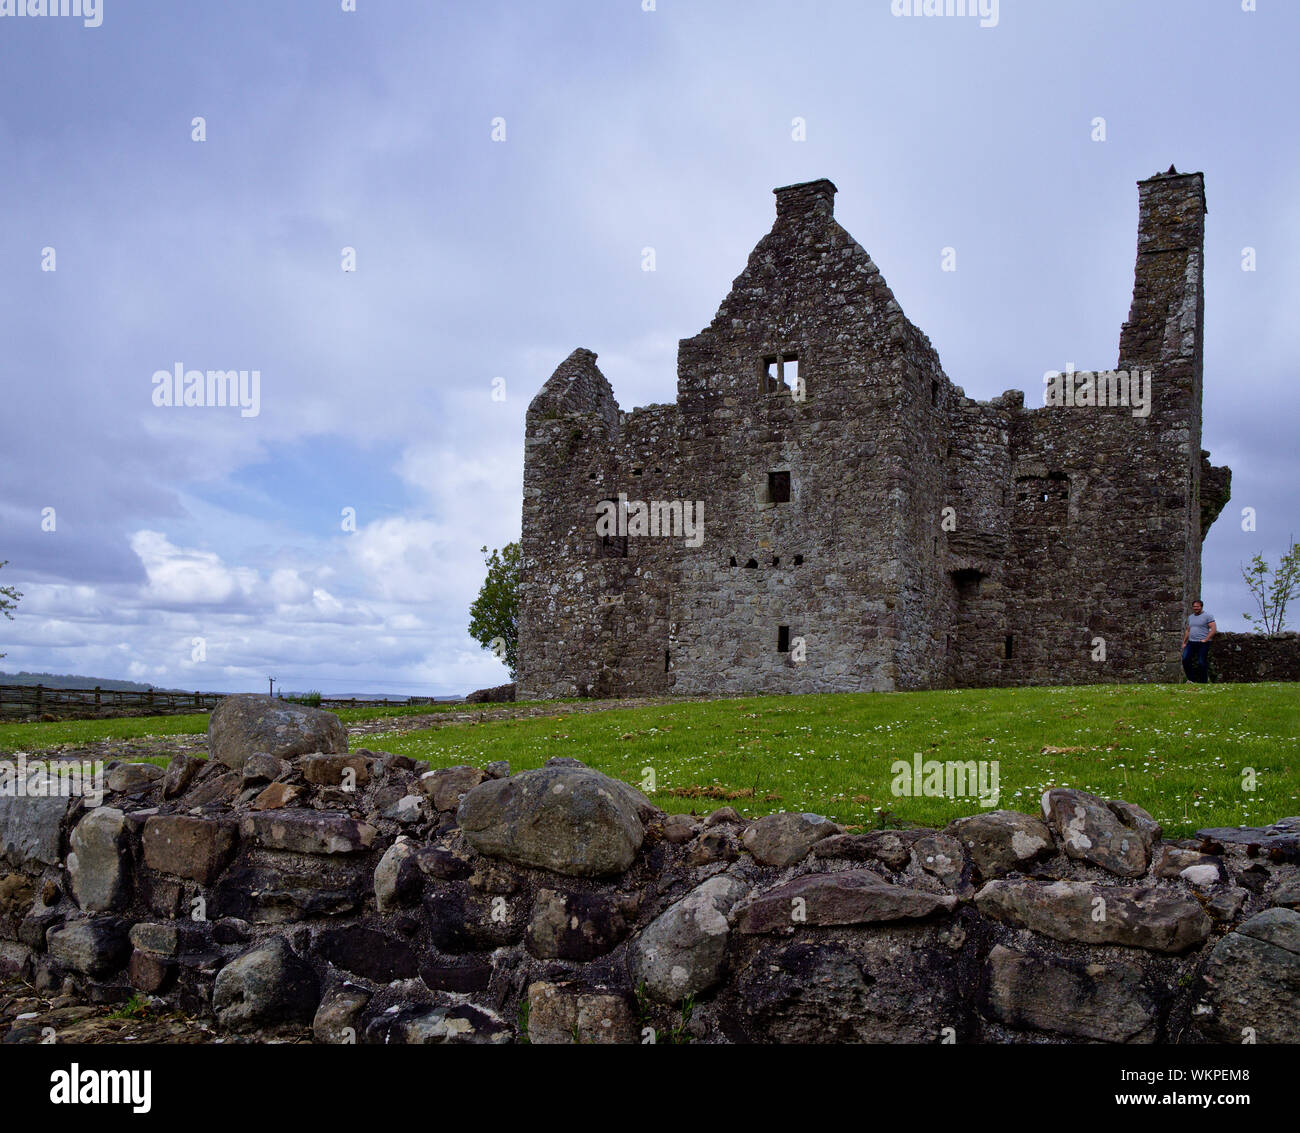 Ruins of Tully Castle which was sacked and burned by rebel forces during the Irish Rebellion of 1641. Stock Photo